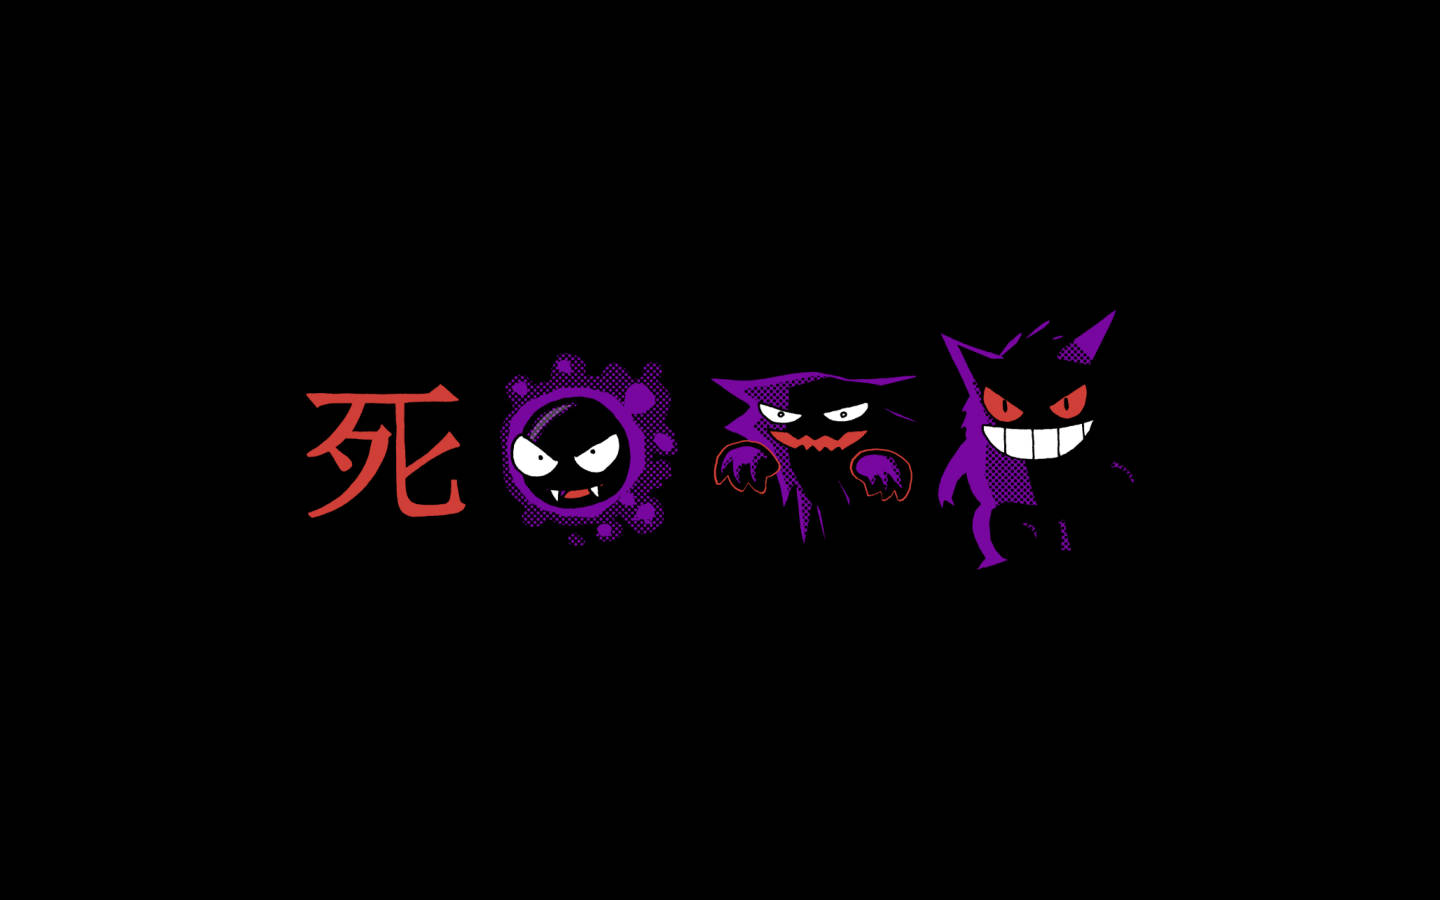 Show your power! Evolution of the powerful Gengar. Wallpaper